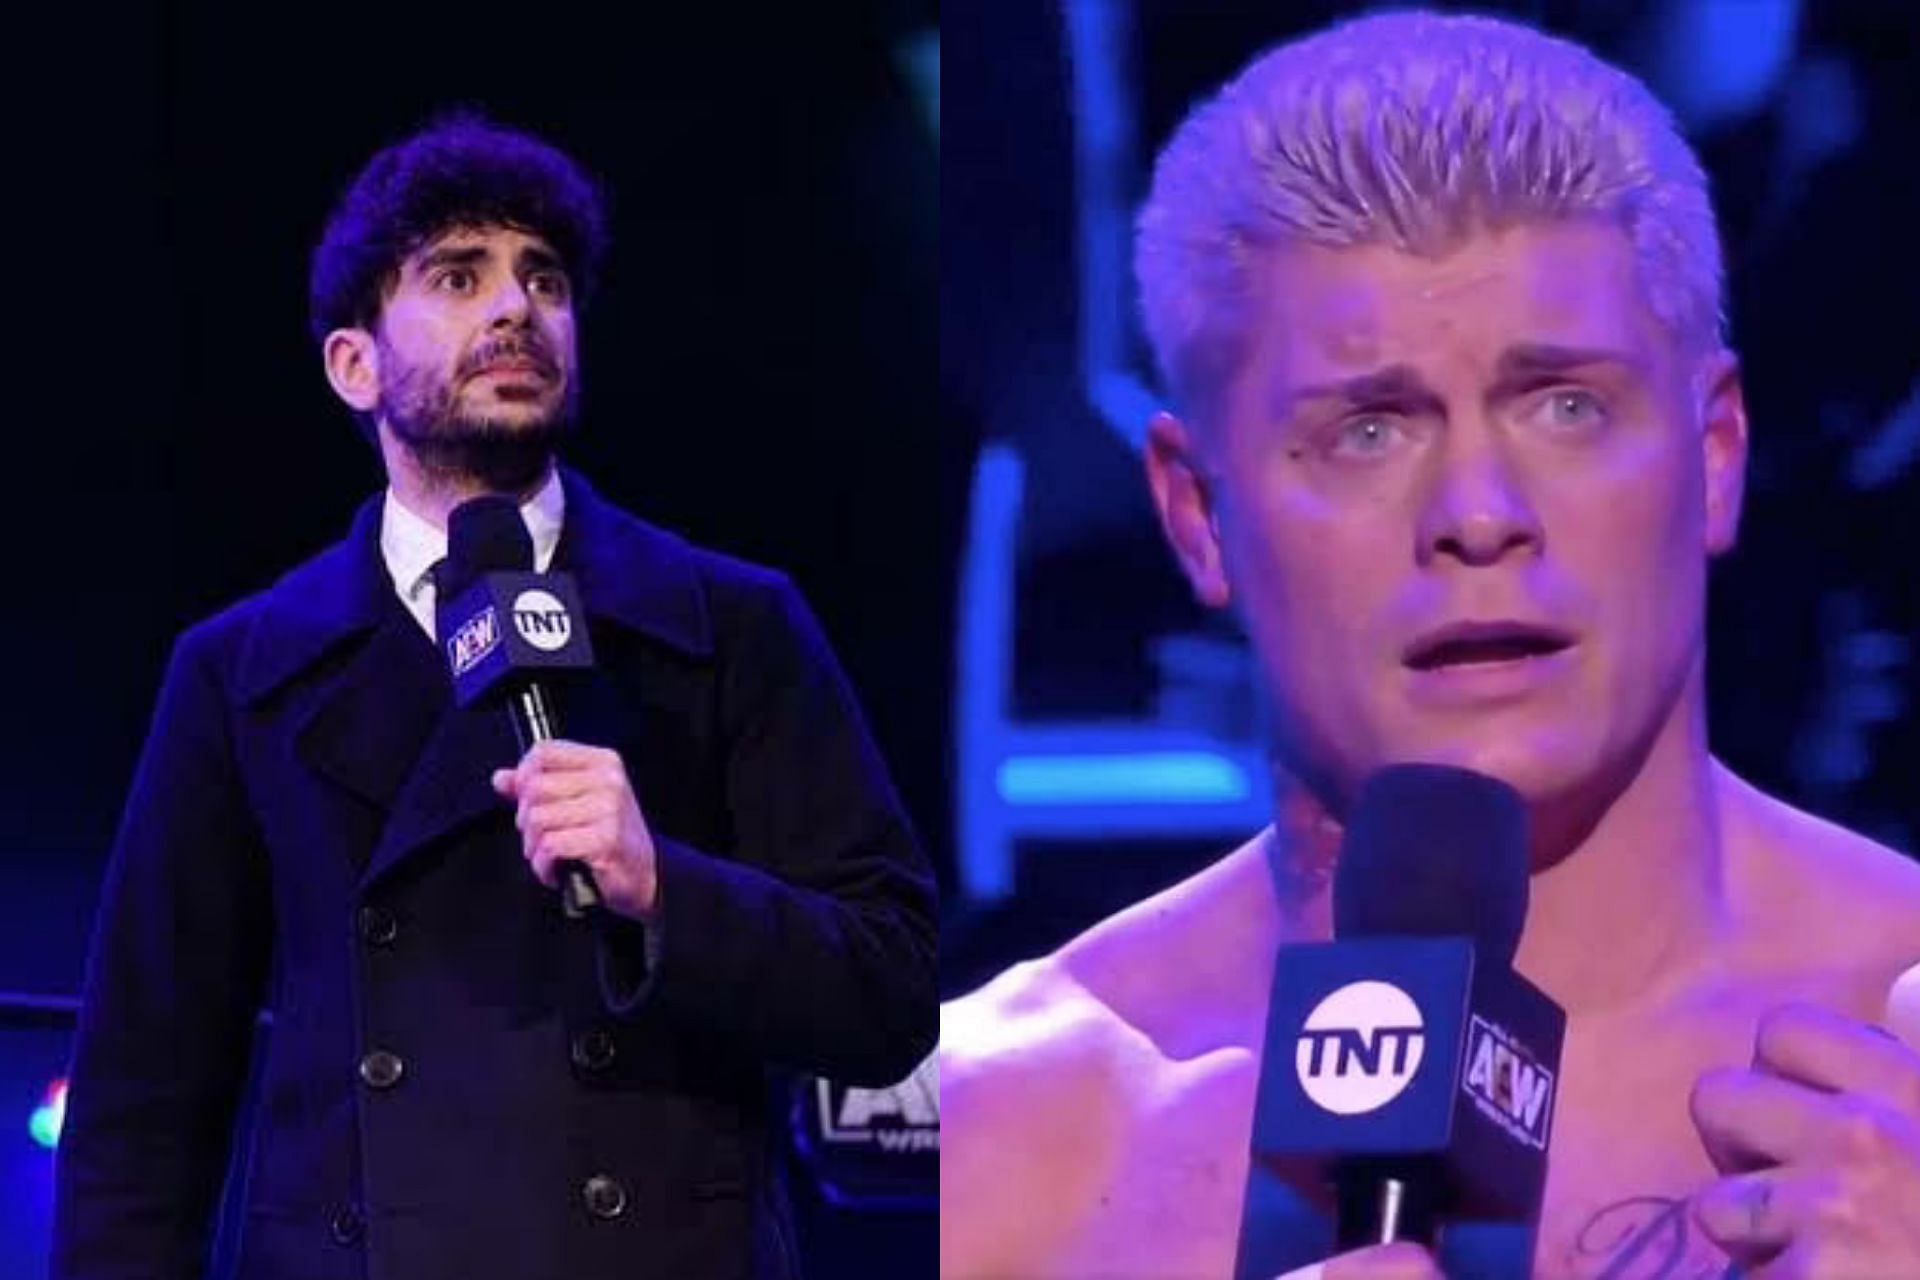 <div></noscript>AEW News Roundup: Tony Khan not returning Hall of Famer's calls, former WWE star worried during Cody Rhodes match, MJF compared to legend</div>